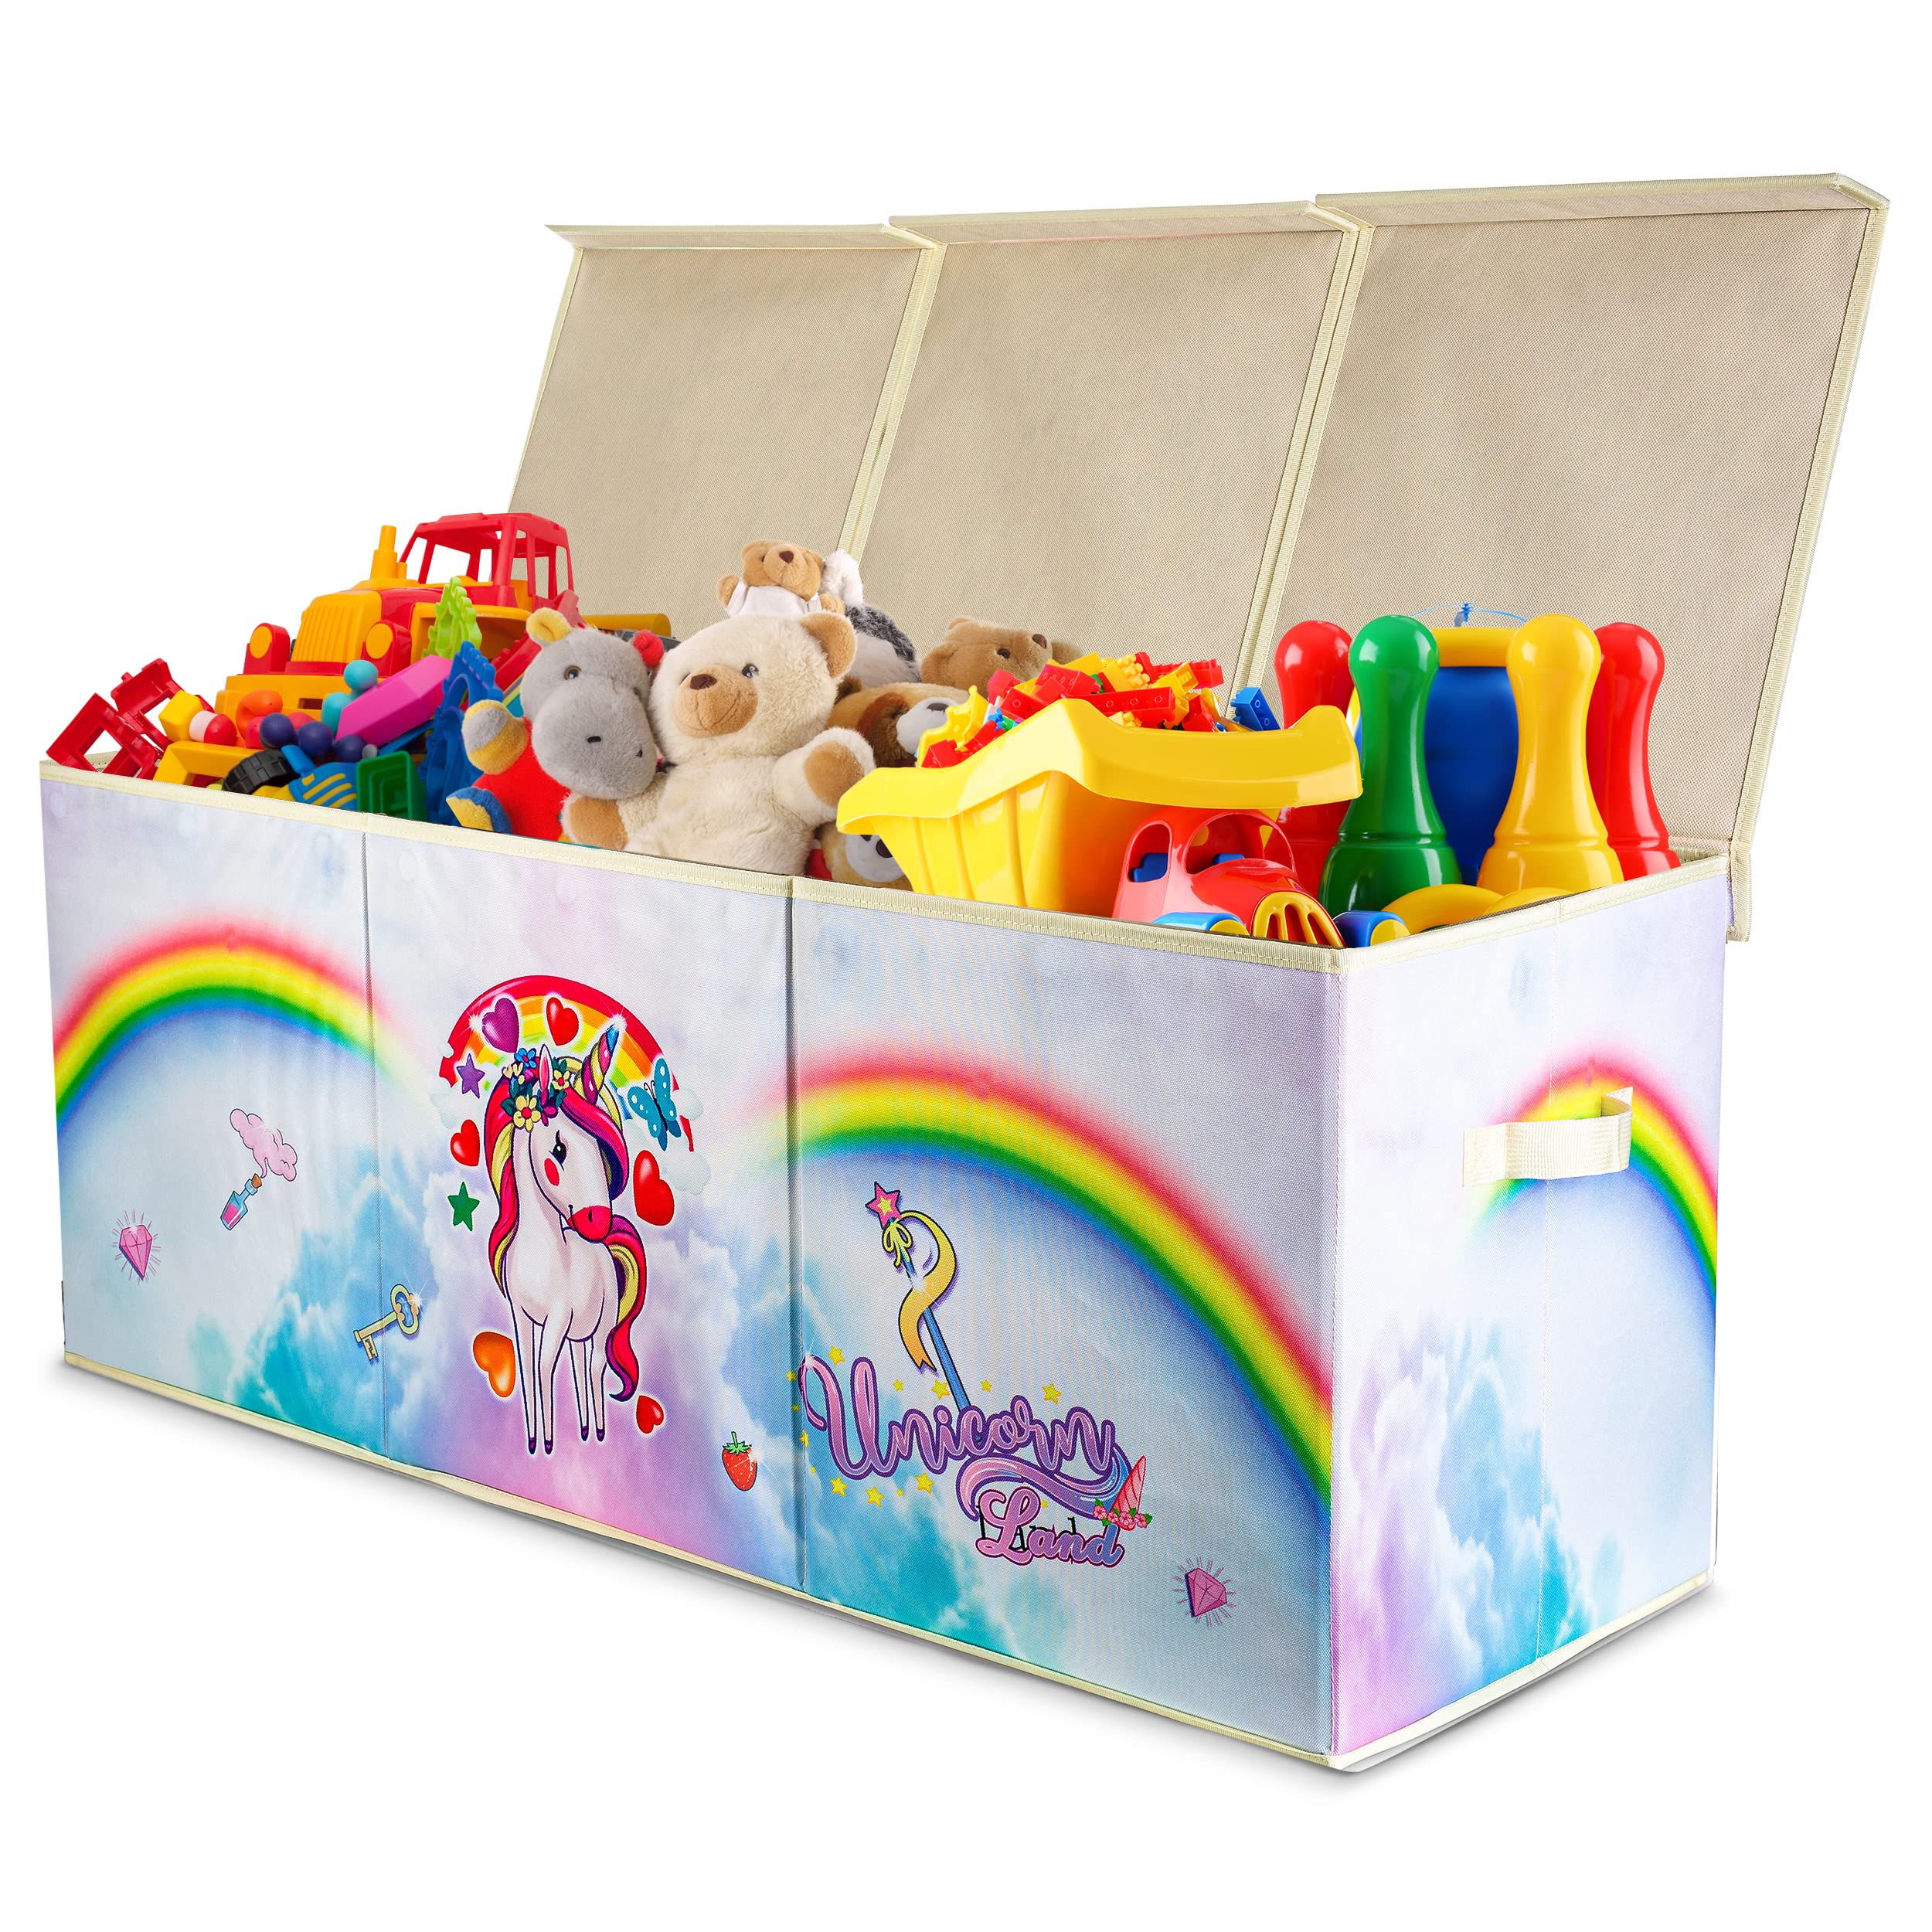 Toy to Enjoy Kids Toy Box - Large Stuffed Animal Storage, Collapsible Toy Chest Bin, Durable Fabric Toy Box for Boys & Girls - Storage Basket with Lid & Removable Inserts, 38x13x15 Inches - Unicorn